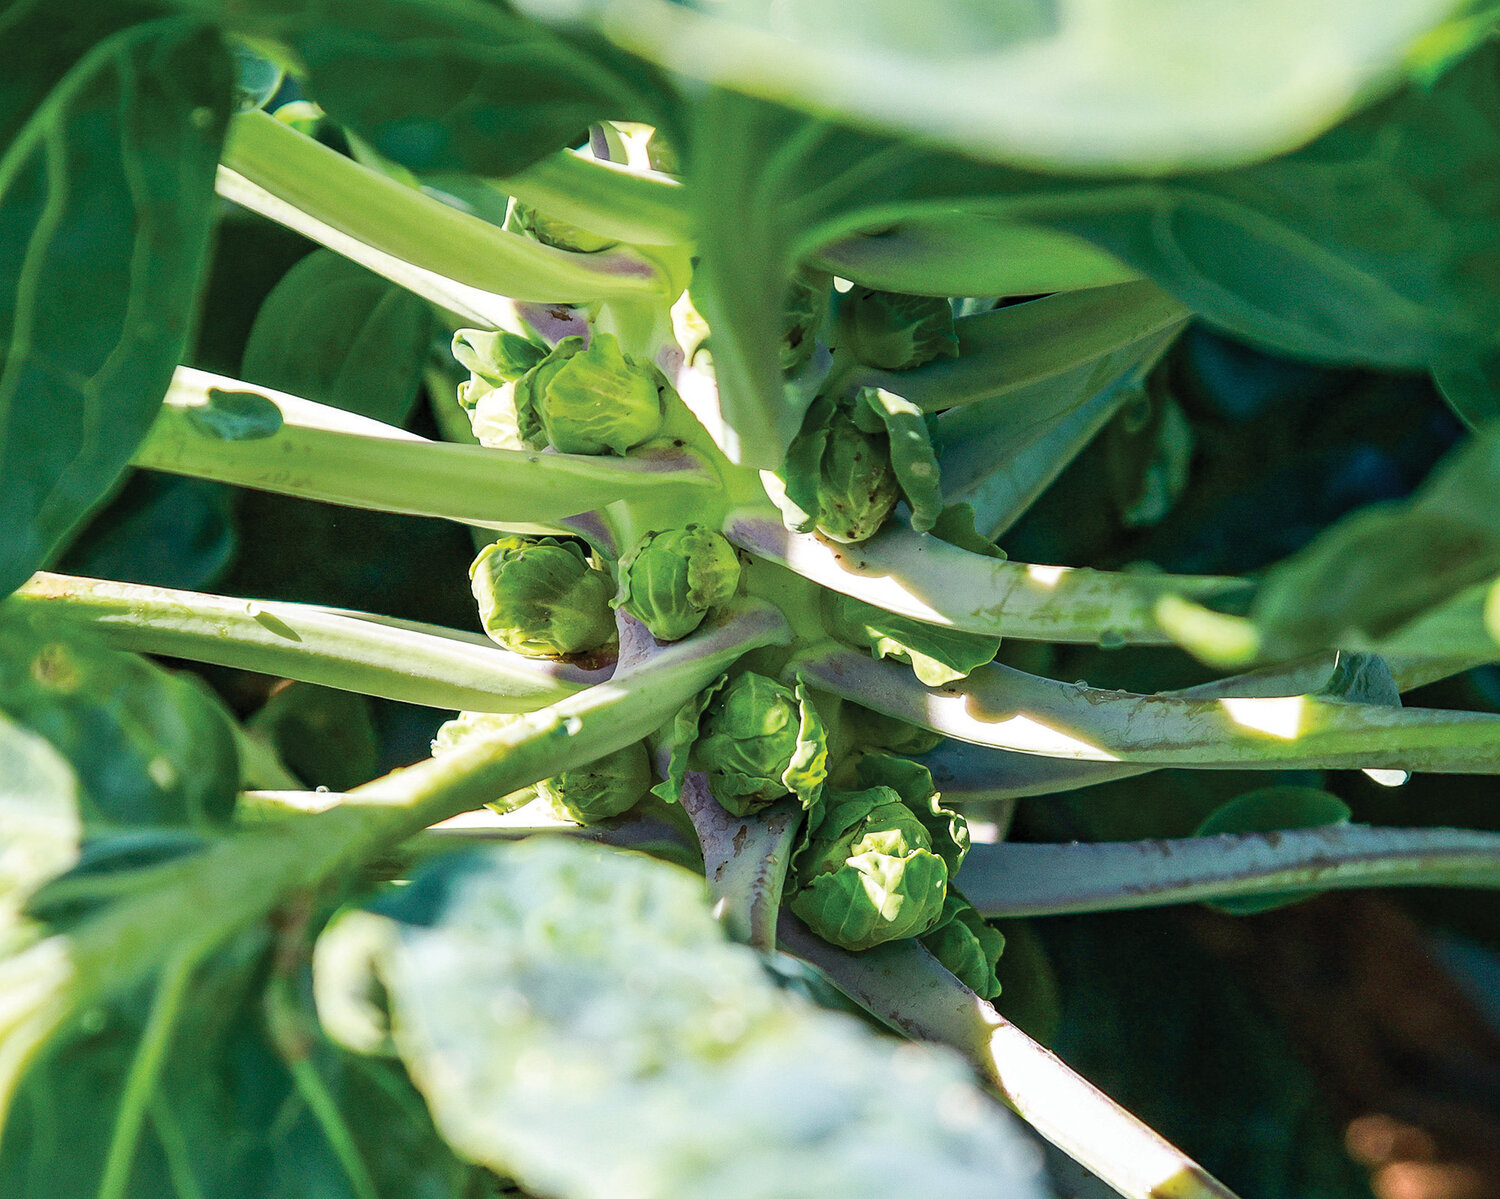 Brussels sprouts were still growing in Mindful Creations’ produce field on Sept. 6.